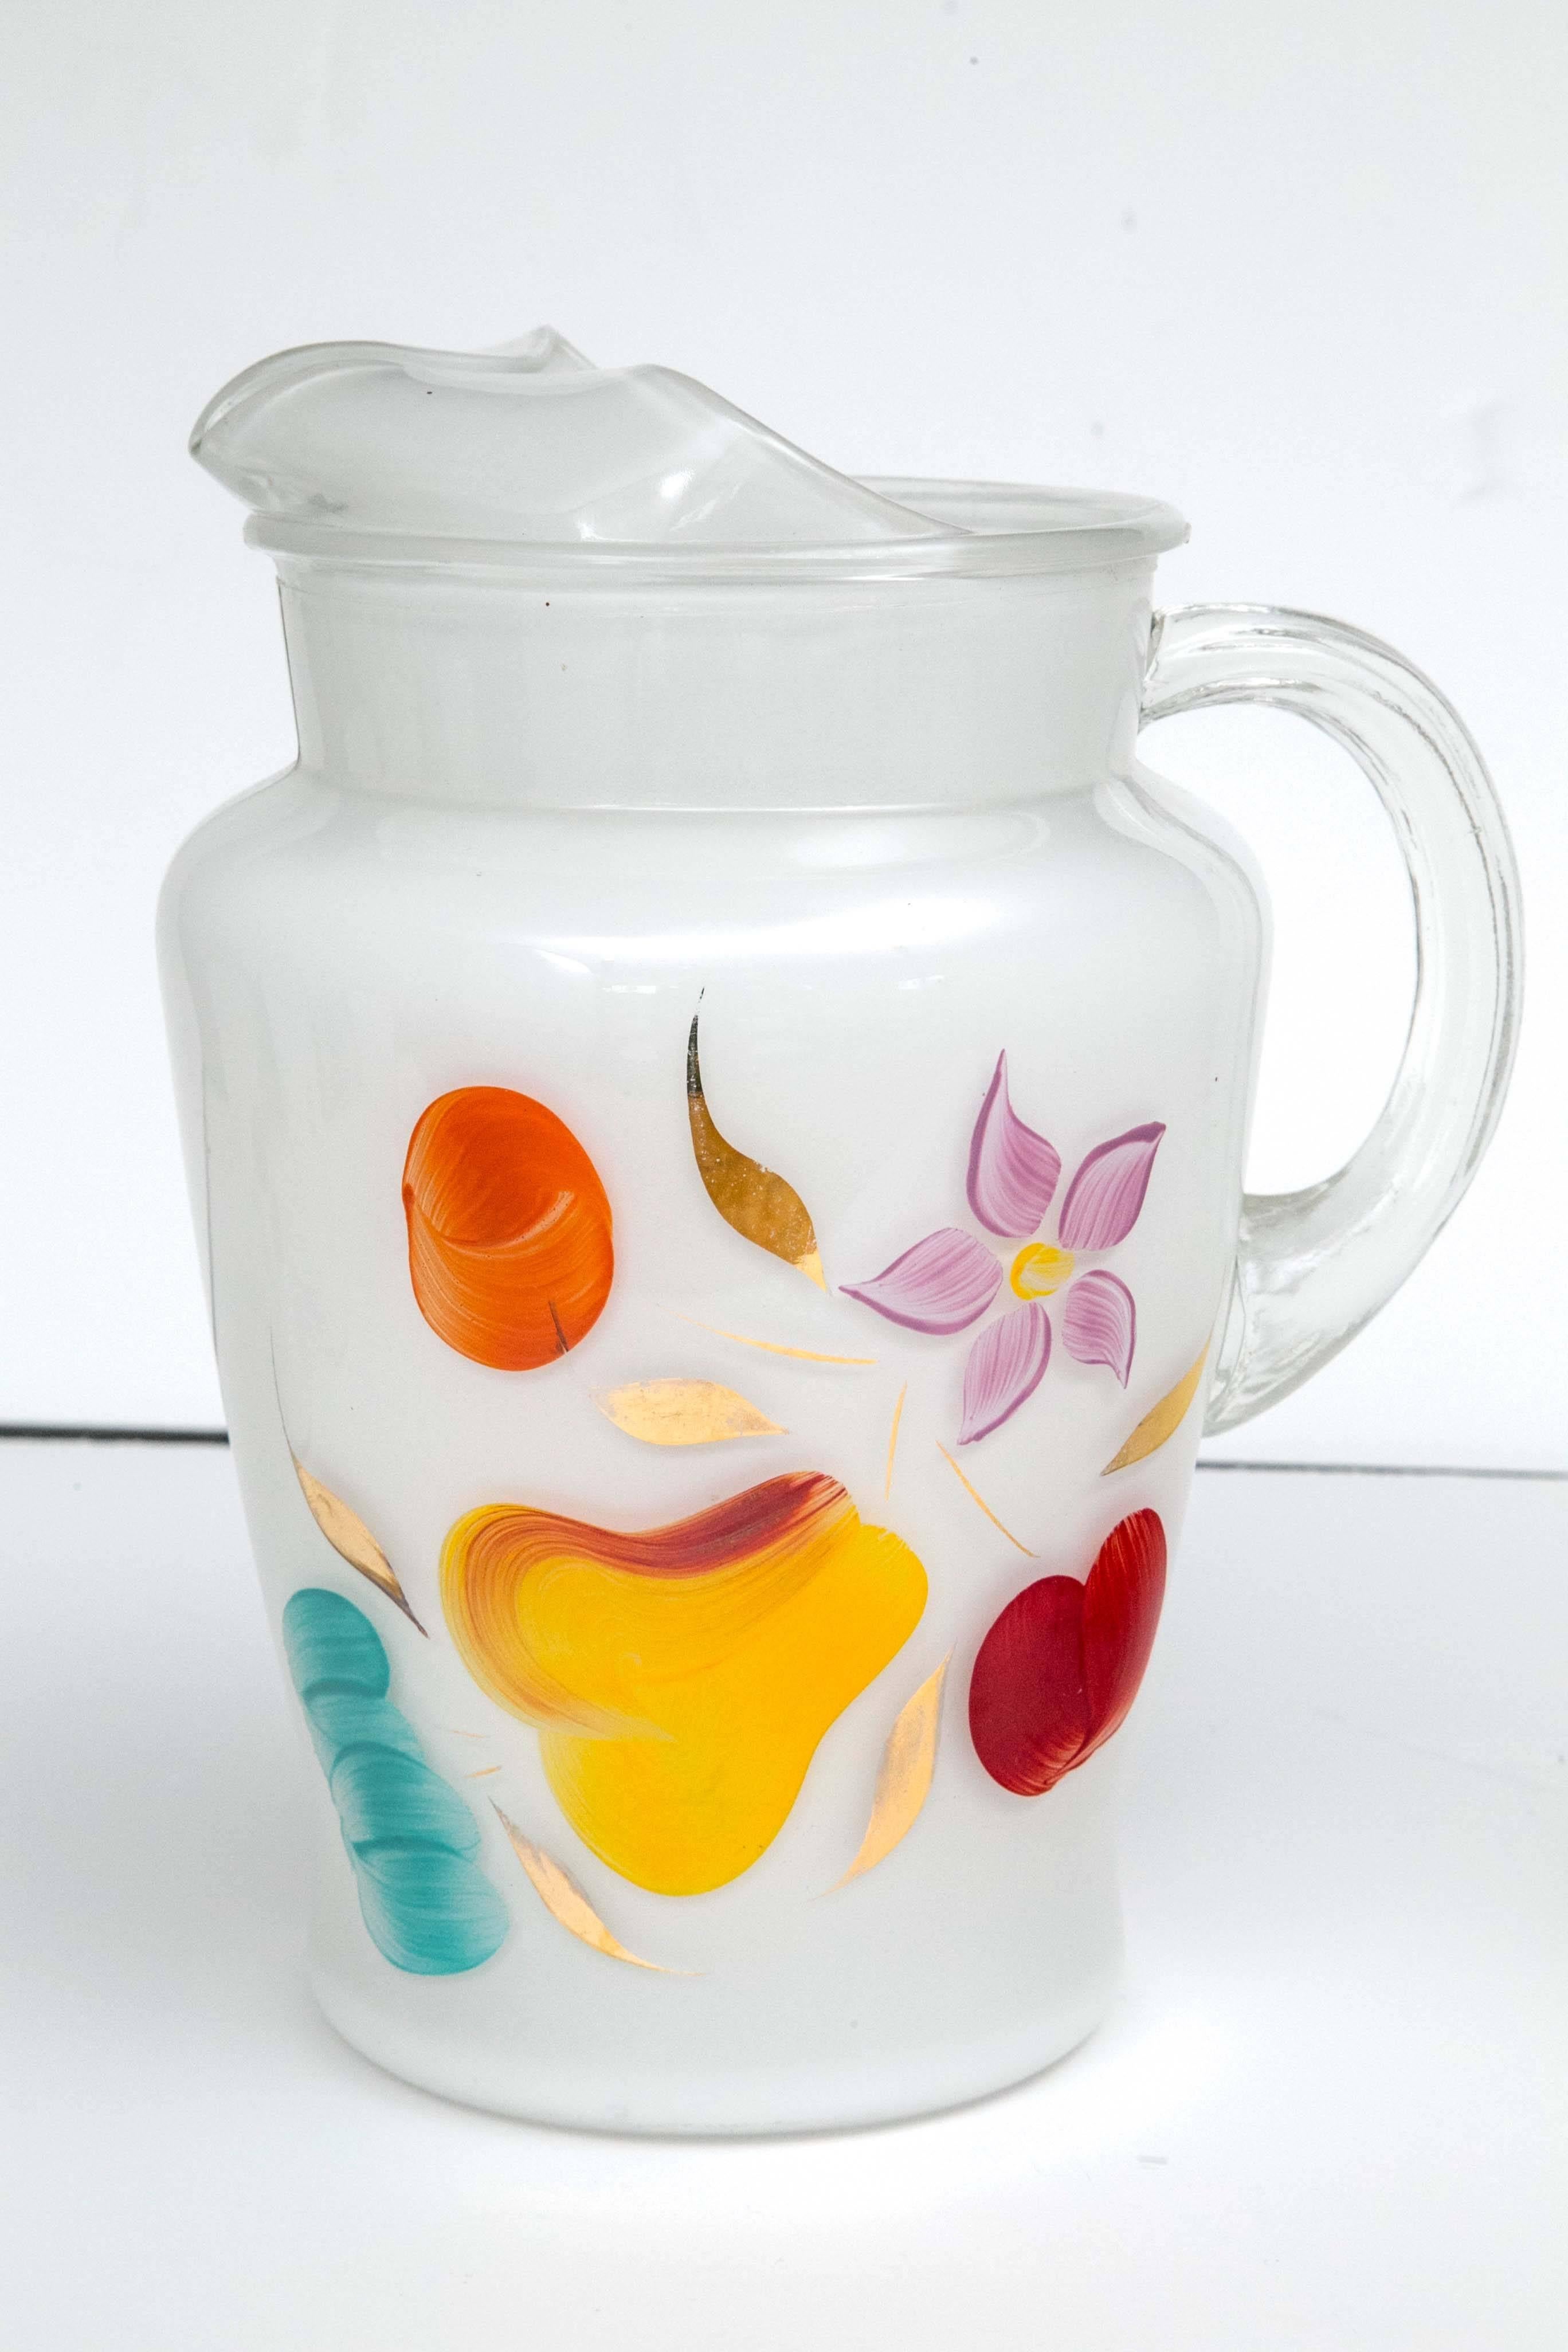 Beautiful frosted glass hand-painted gold leaf fruit design pitcher and six glasses. From a beautiful South Hampton estate. This exquisite set (possibly Fenton) is a stunner for serving breakfast, lunch, appetizers, dinner, dessert or drinks on the